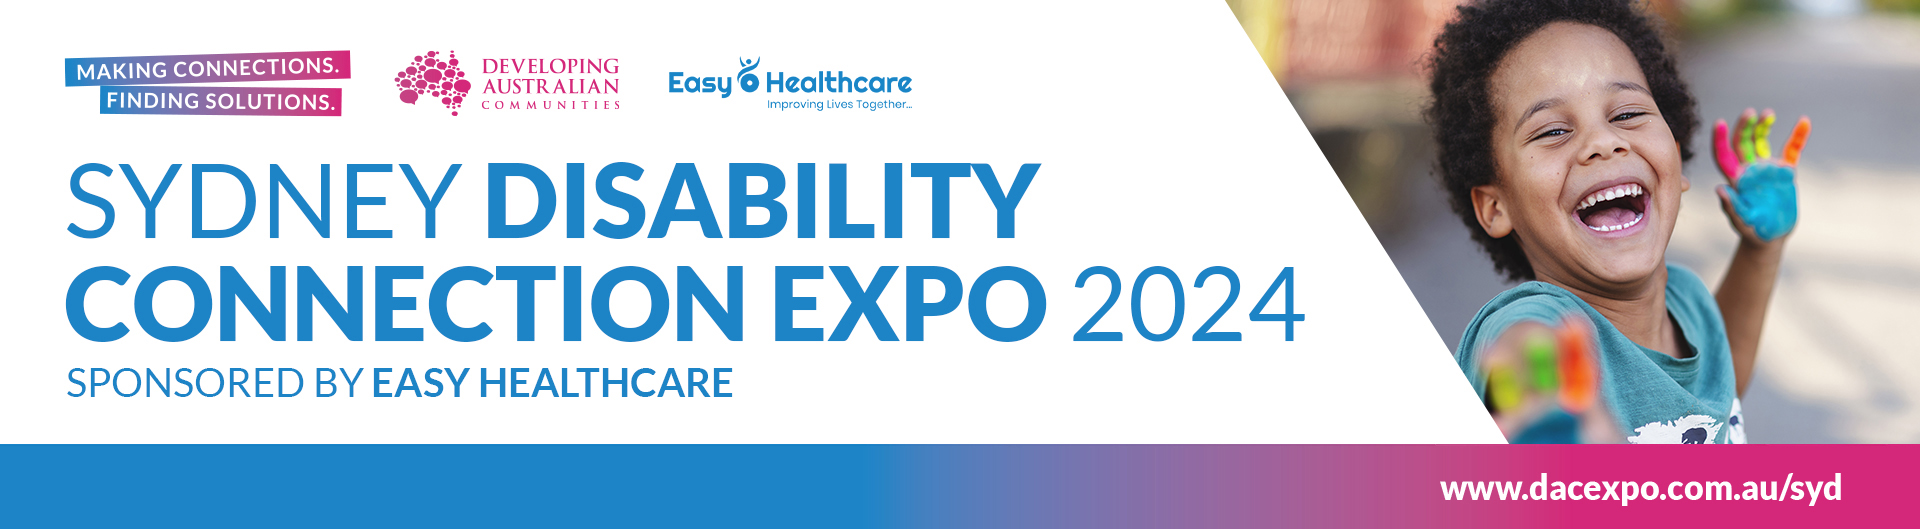 Sydney Disability Connection Expo 2024 is coming to ICC Sydney on 24 to 25 May 2024.